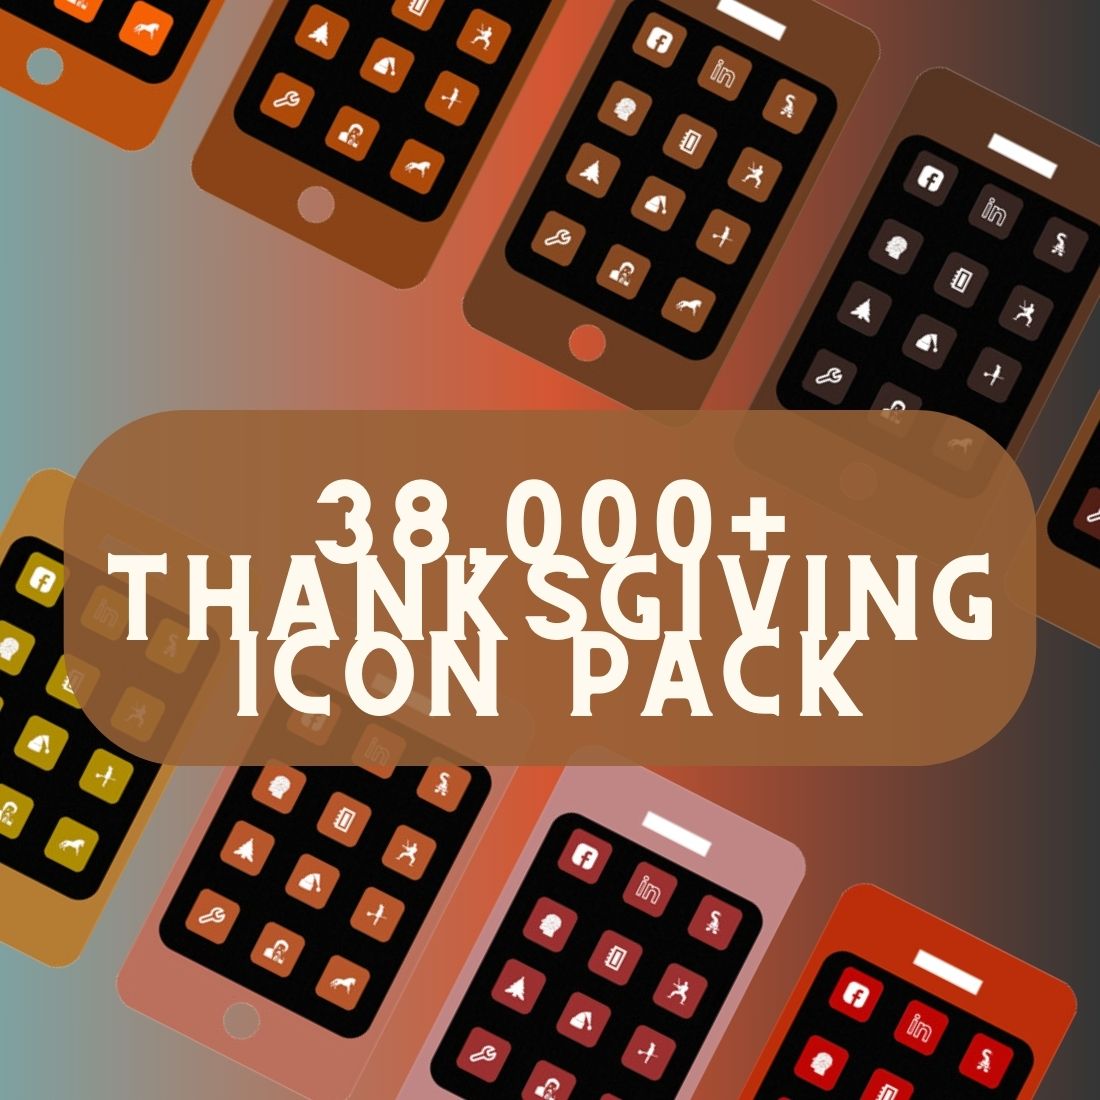 THANKSGIVING ICONS PACK cover image.